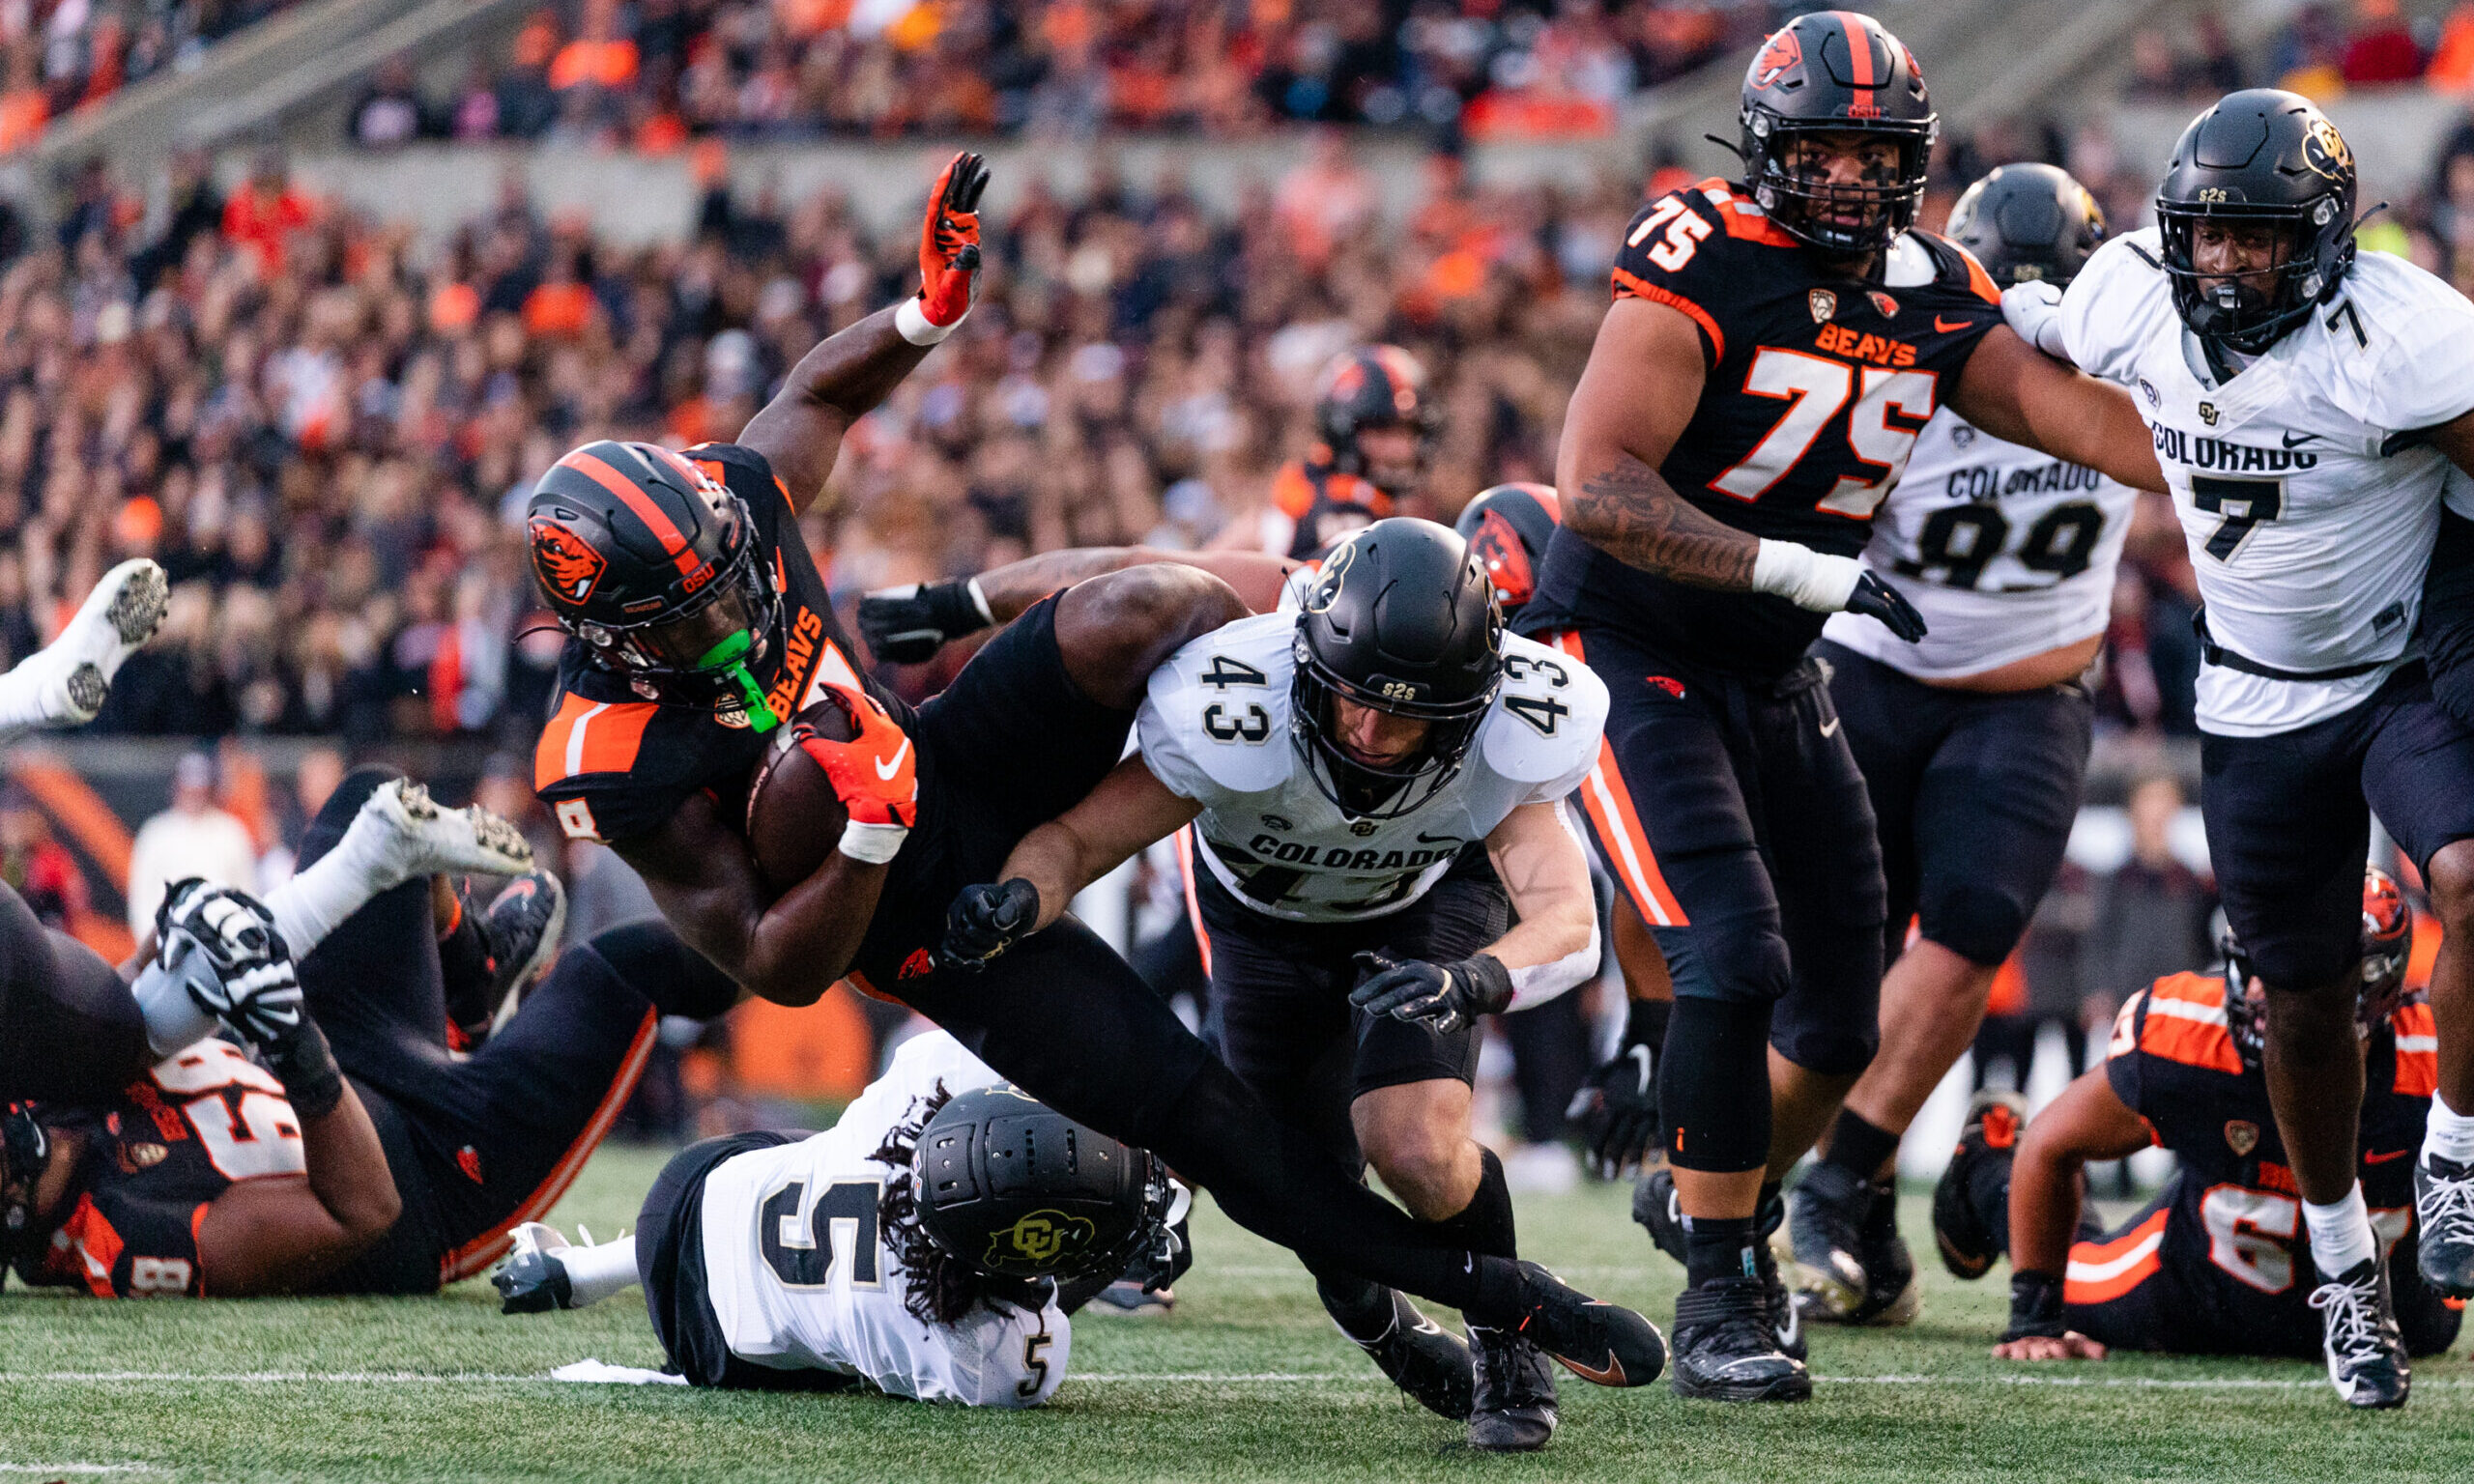 Oregon State Beavers gets tackled by Safety Trevor Woods #43 of the Colorado Buffaloes...